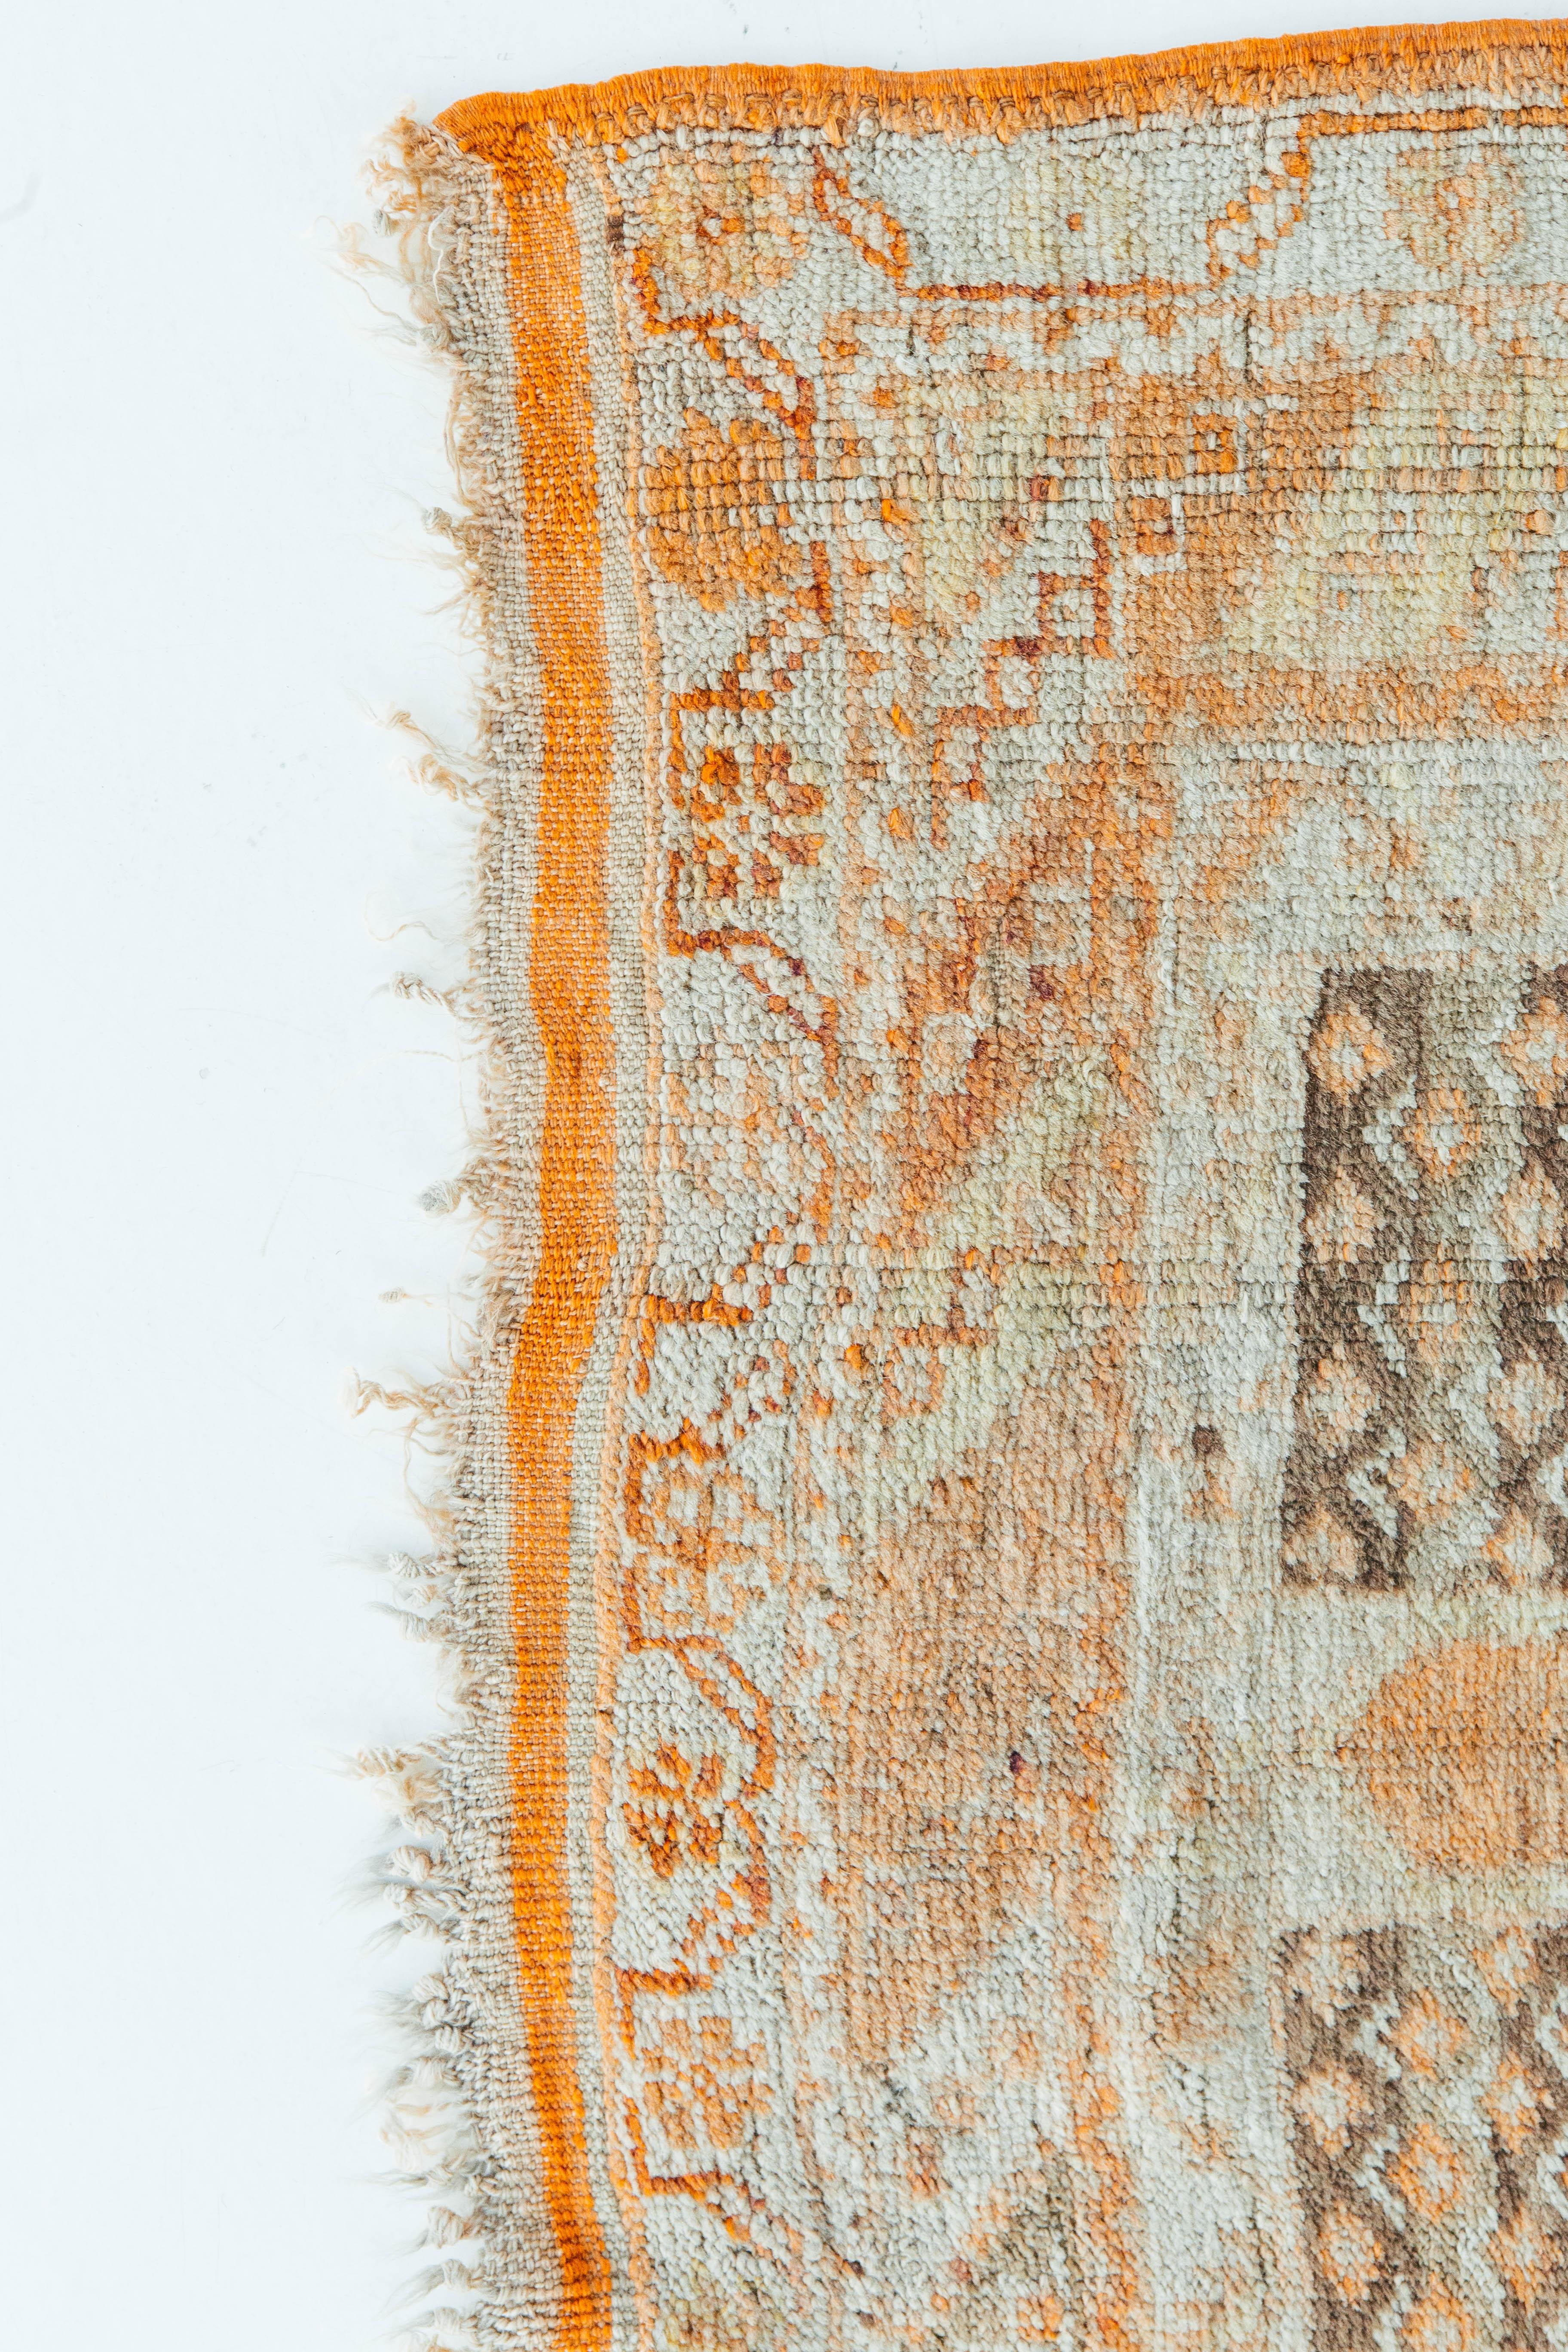 A vibrant and interesting antique Turkish Oushak rug. This piece contains a central medallion with surrounding tribal patterns in saffron, vintage blue, and hints of gray. Suitable for a wide variety of interiors and is sure to bring character to